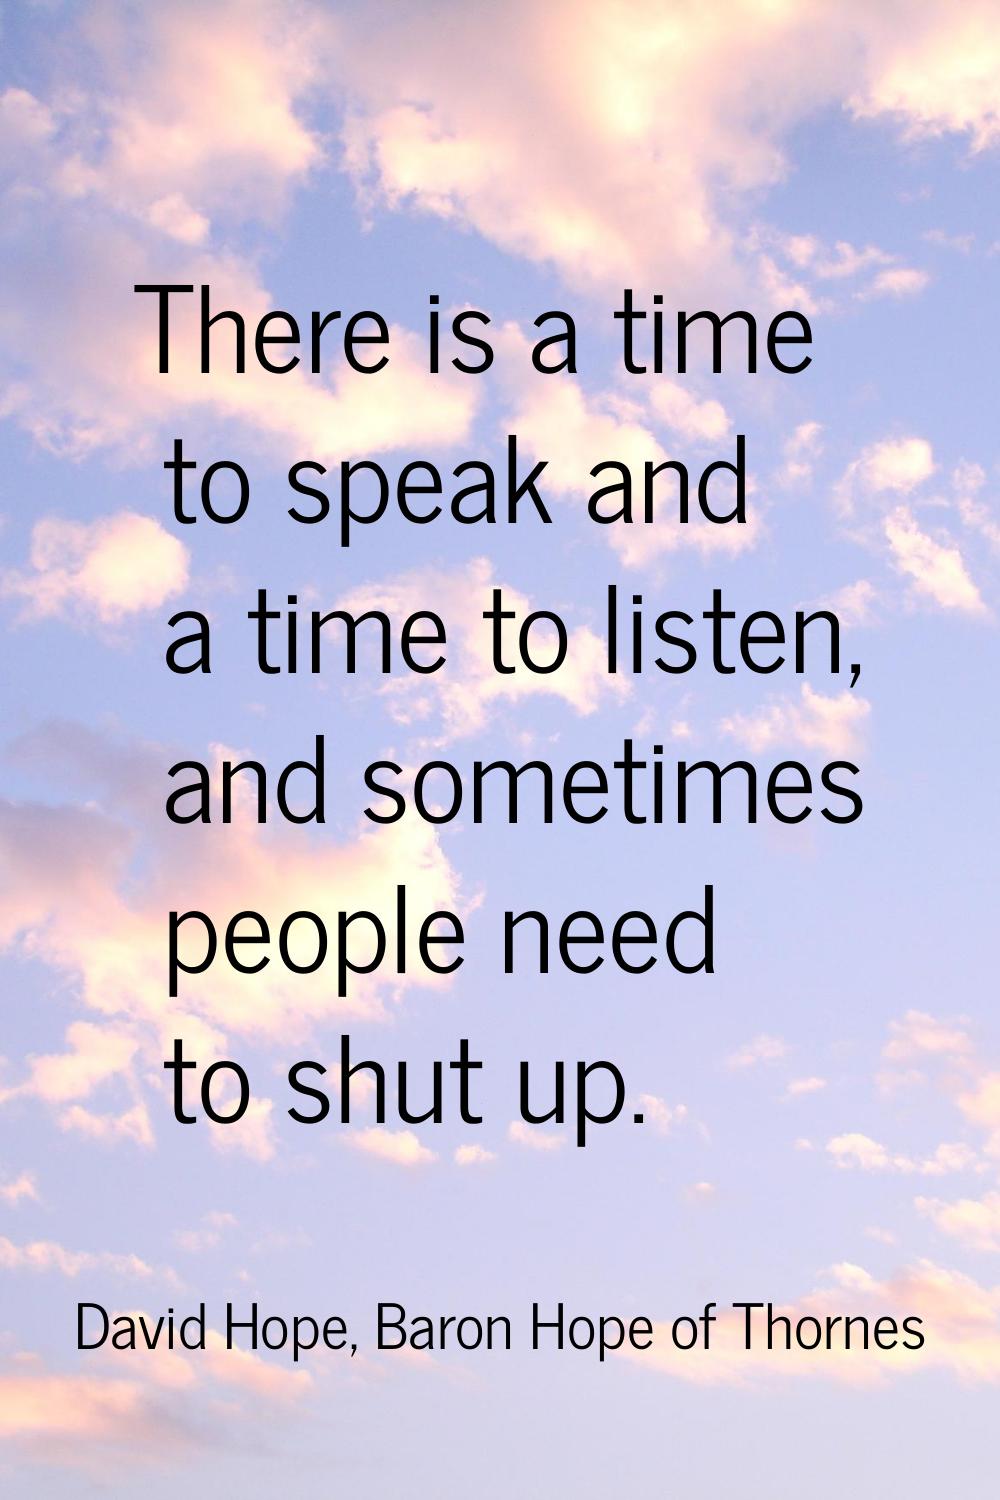 There is a time to speak and a time to listen, and sometimes people need to shut up.